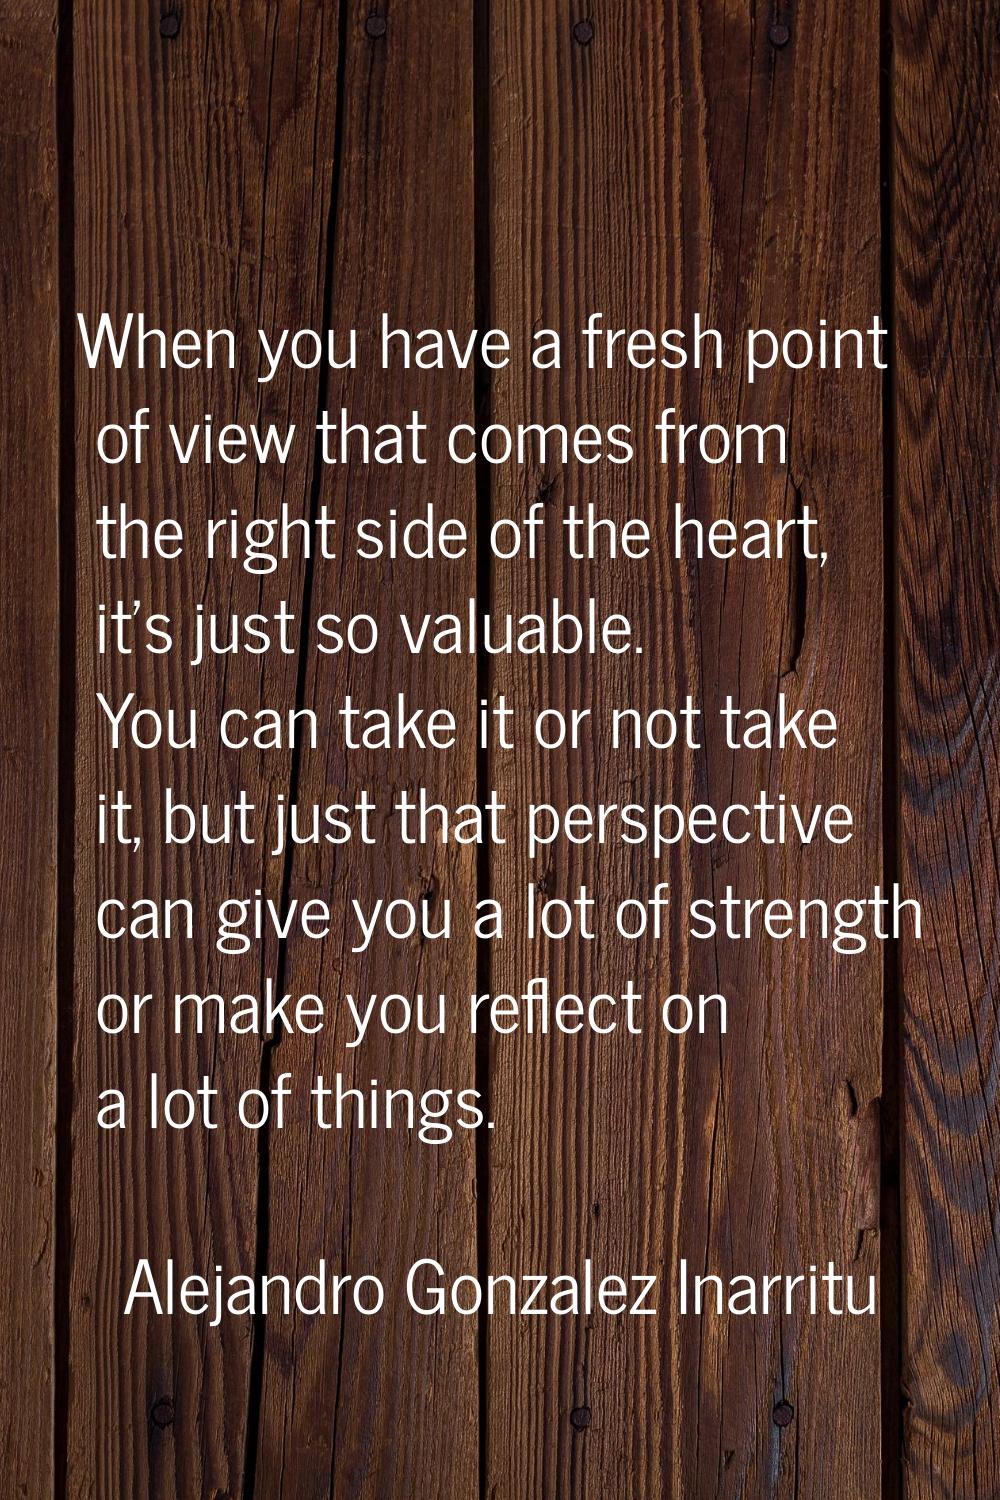 When you have a fresh point of view that comes from the right side of the heart, it's just so valua